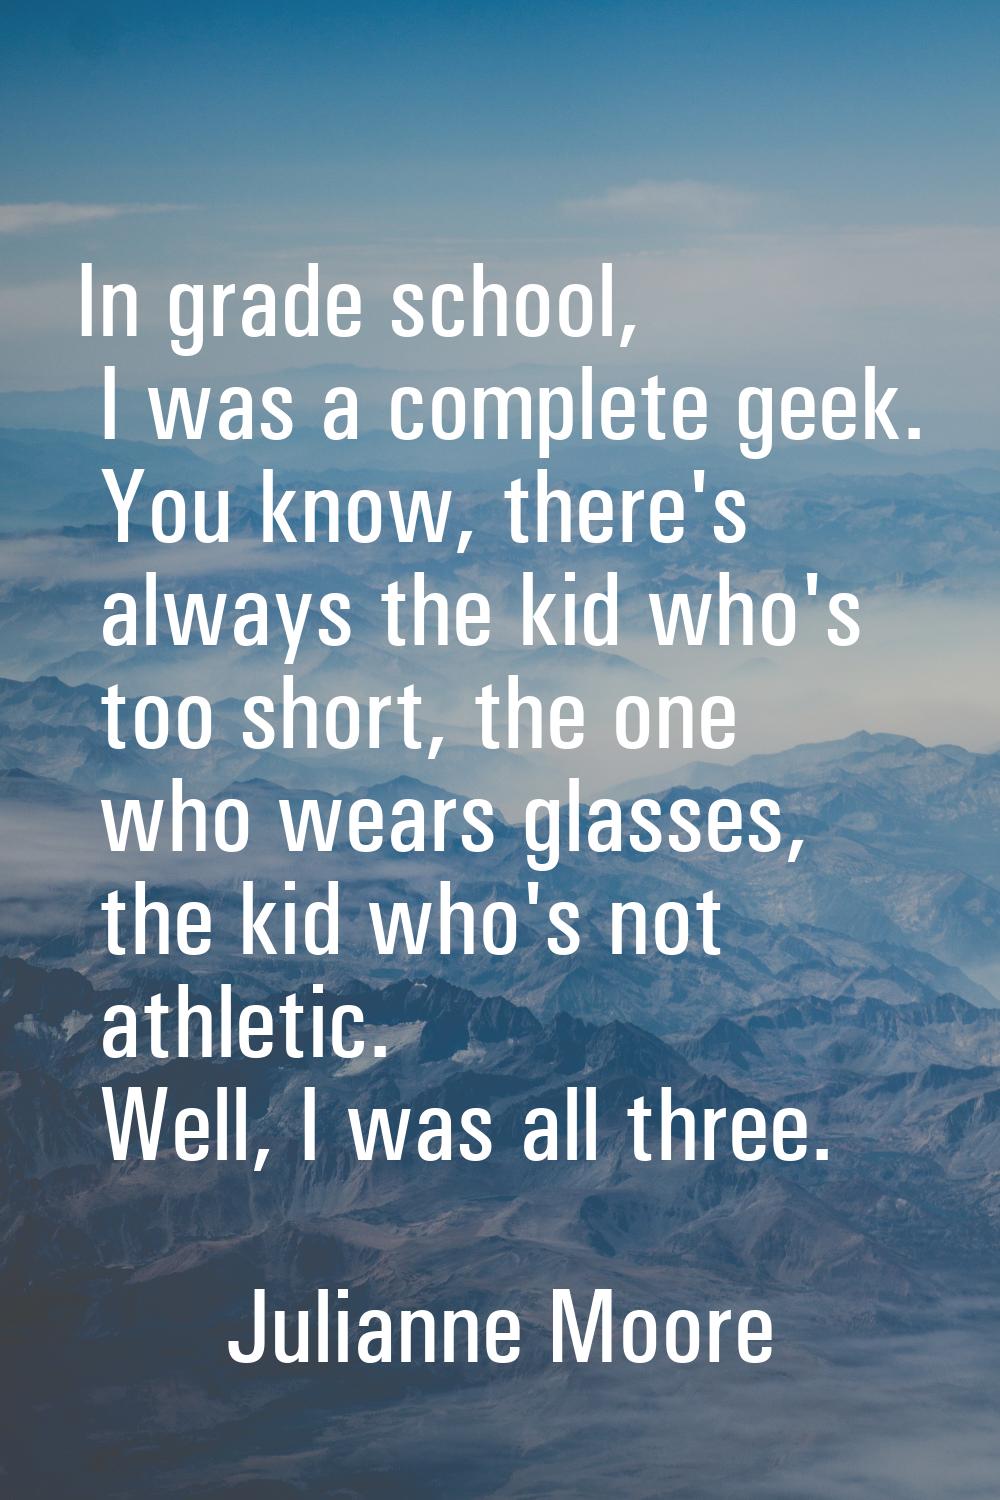 In grade school, I was a complete geek. You know, there's always the kid who's too short, the one w